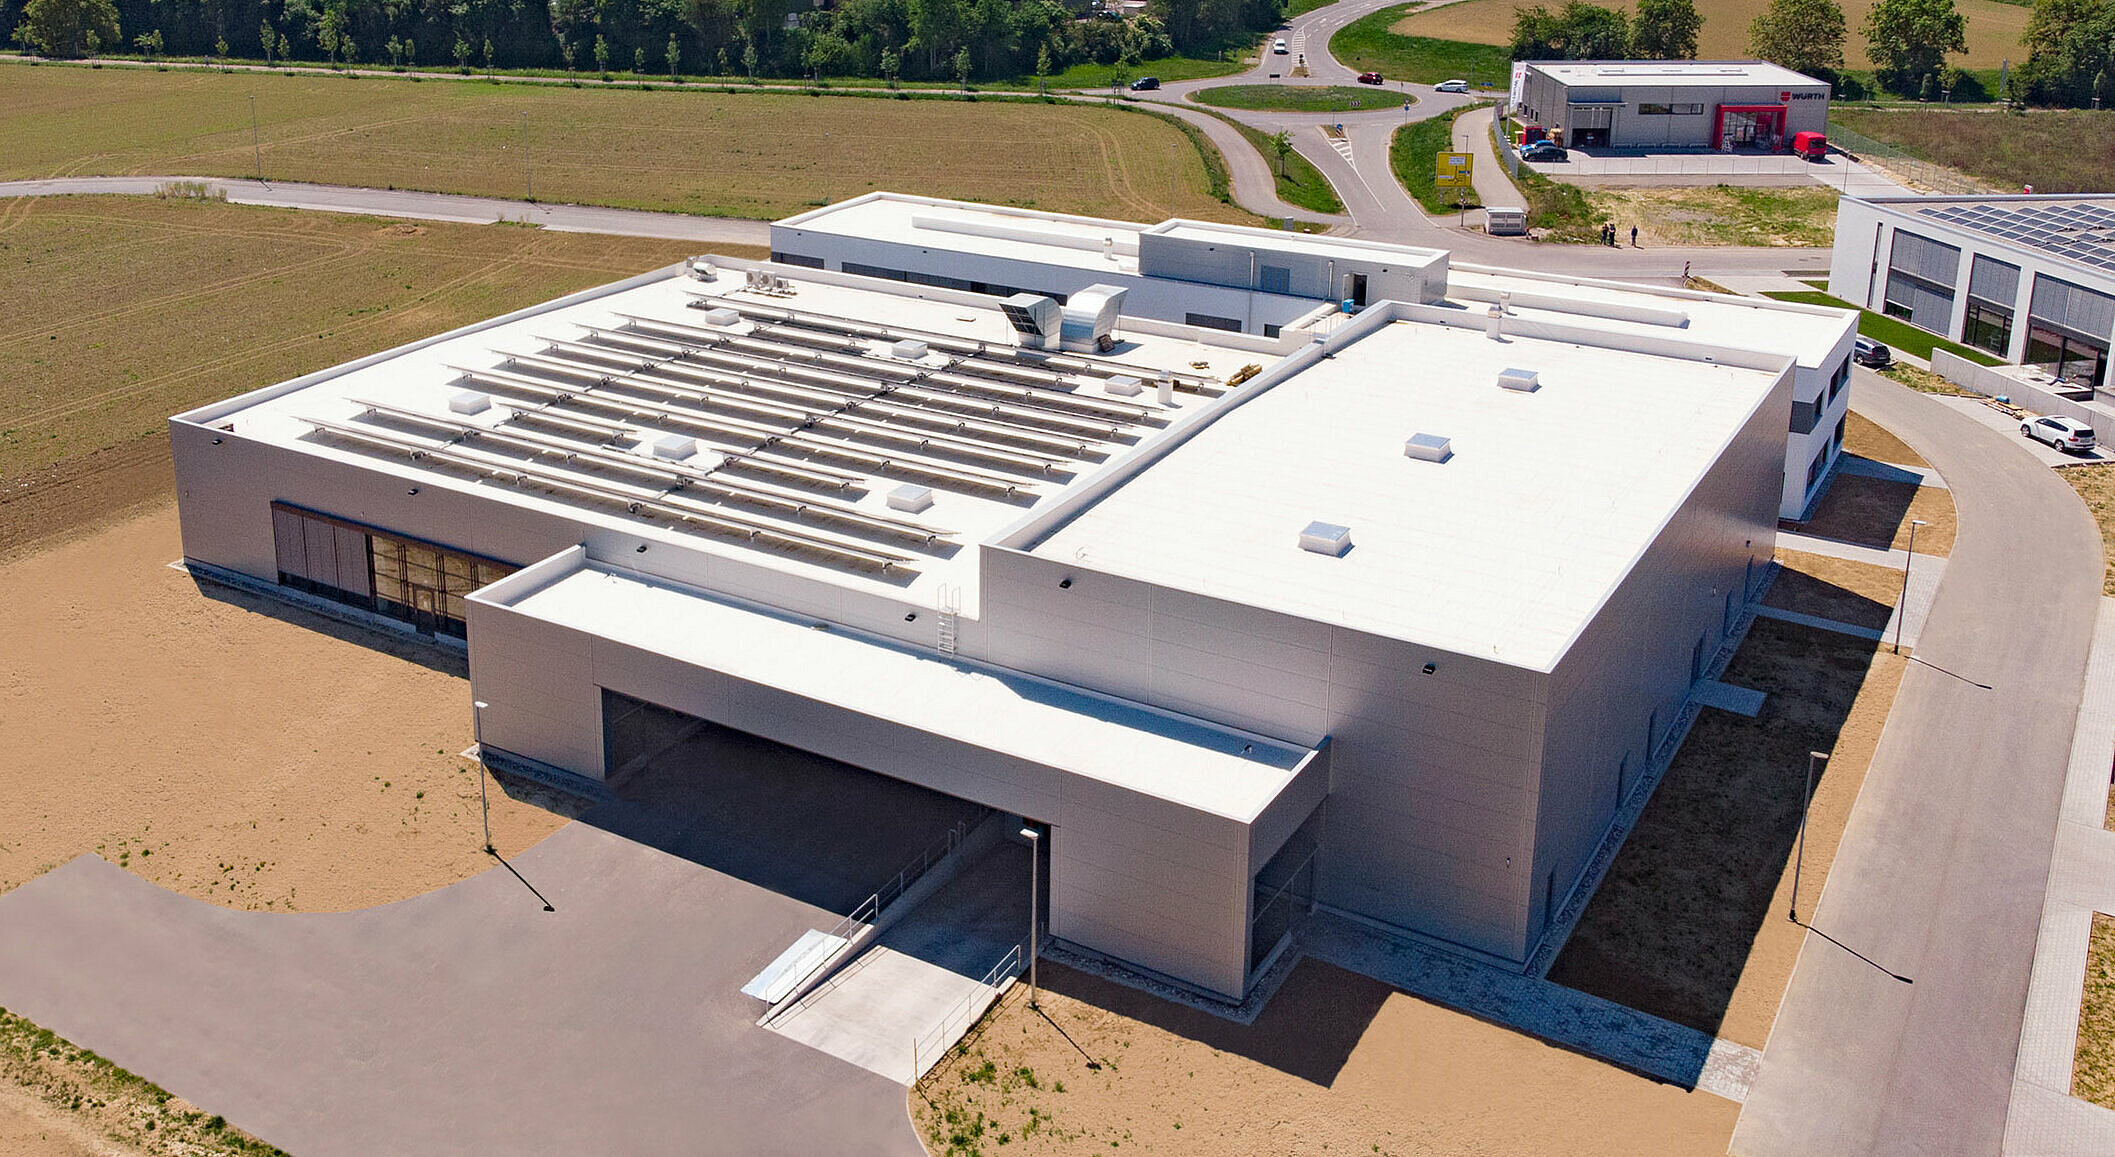 SIKO manufacturing facility in Bad Krozingen location